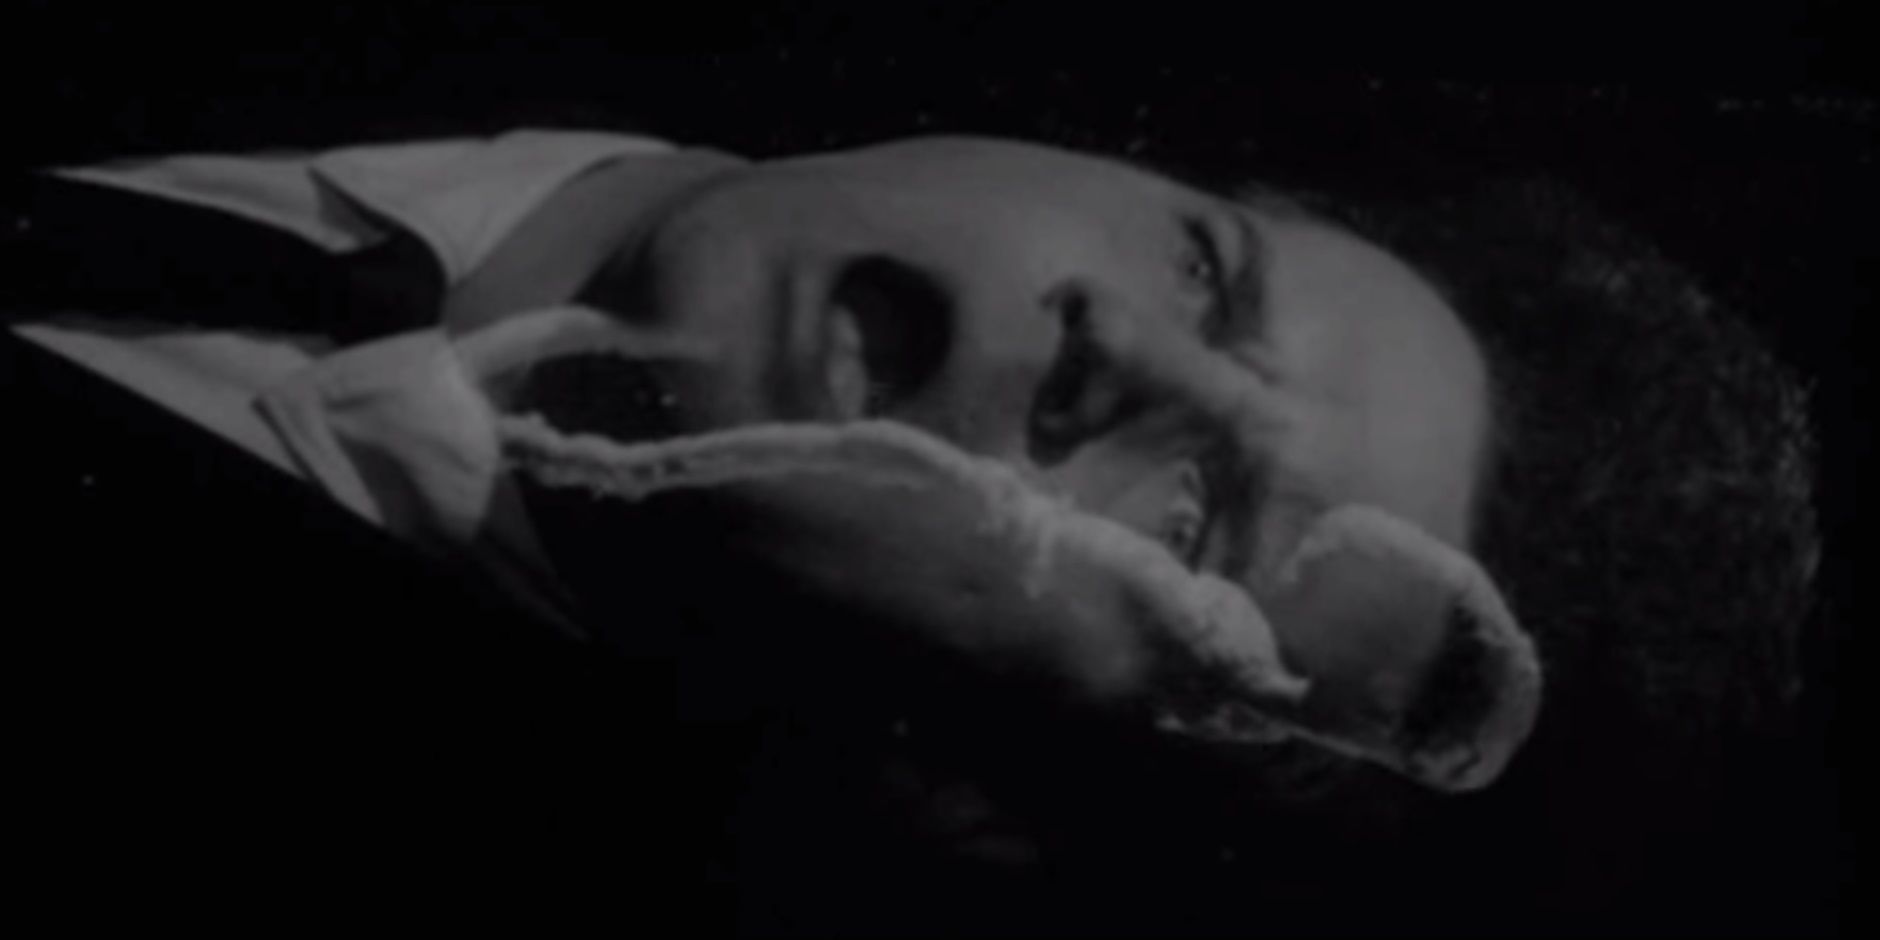 Sexual imagery in Eraserhead